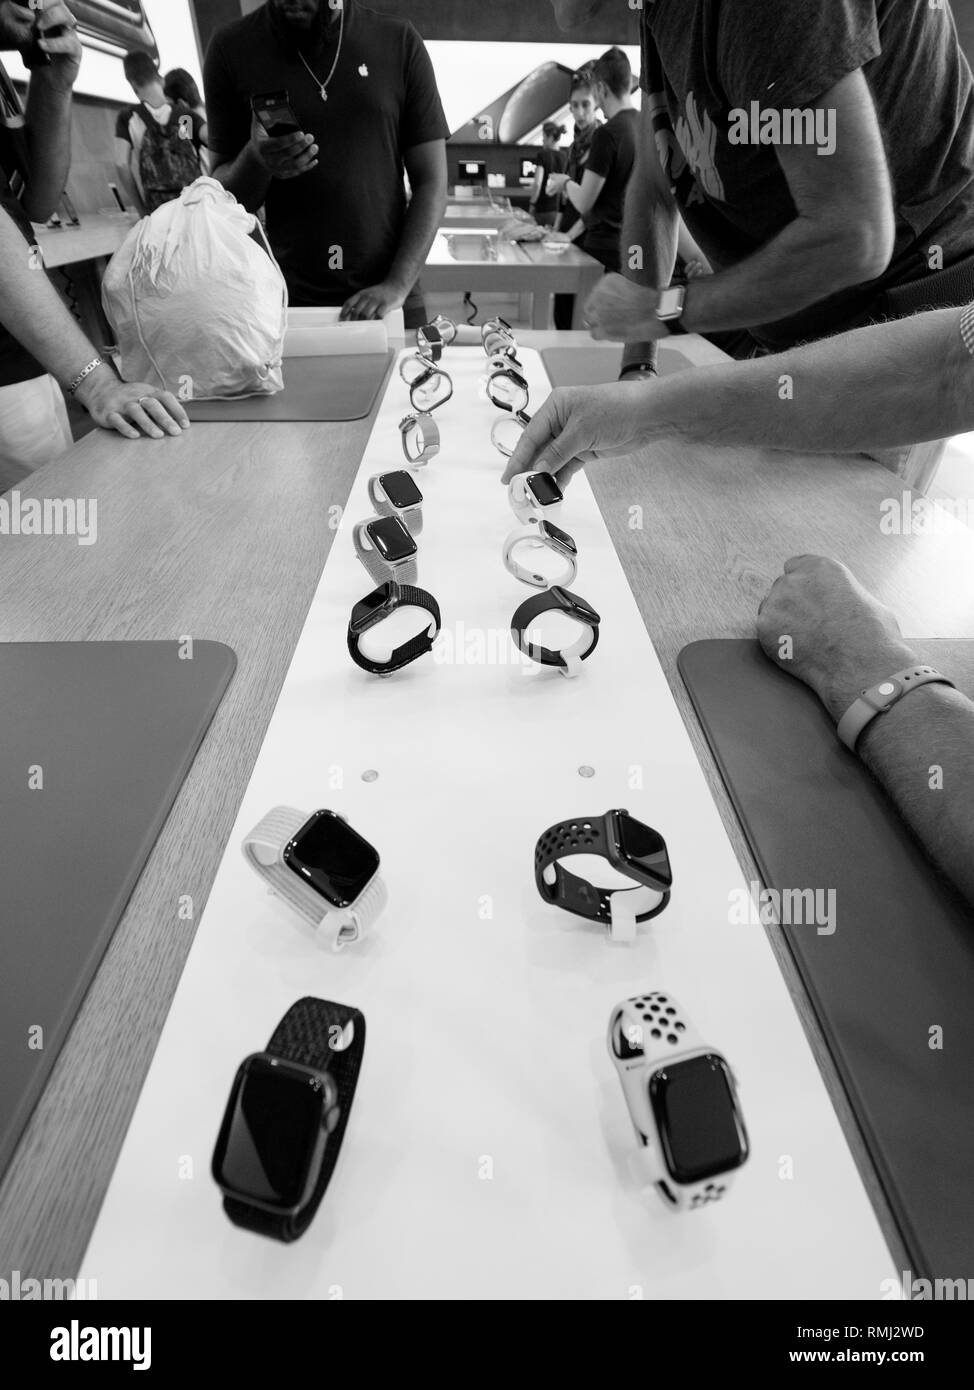 STRASBOURG, FRANCE - SEP 21, 2018: Black and white image of Apple Store with customers people buying admiring the new latest Watch Series 4 wearable smartwatch  Stock Photo